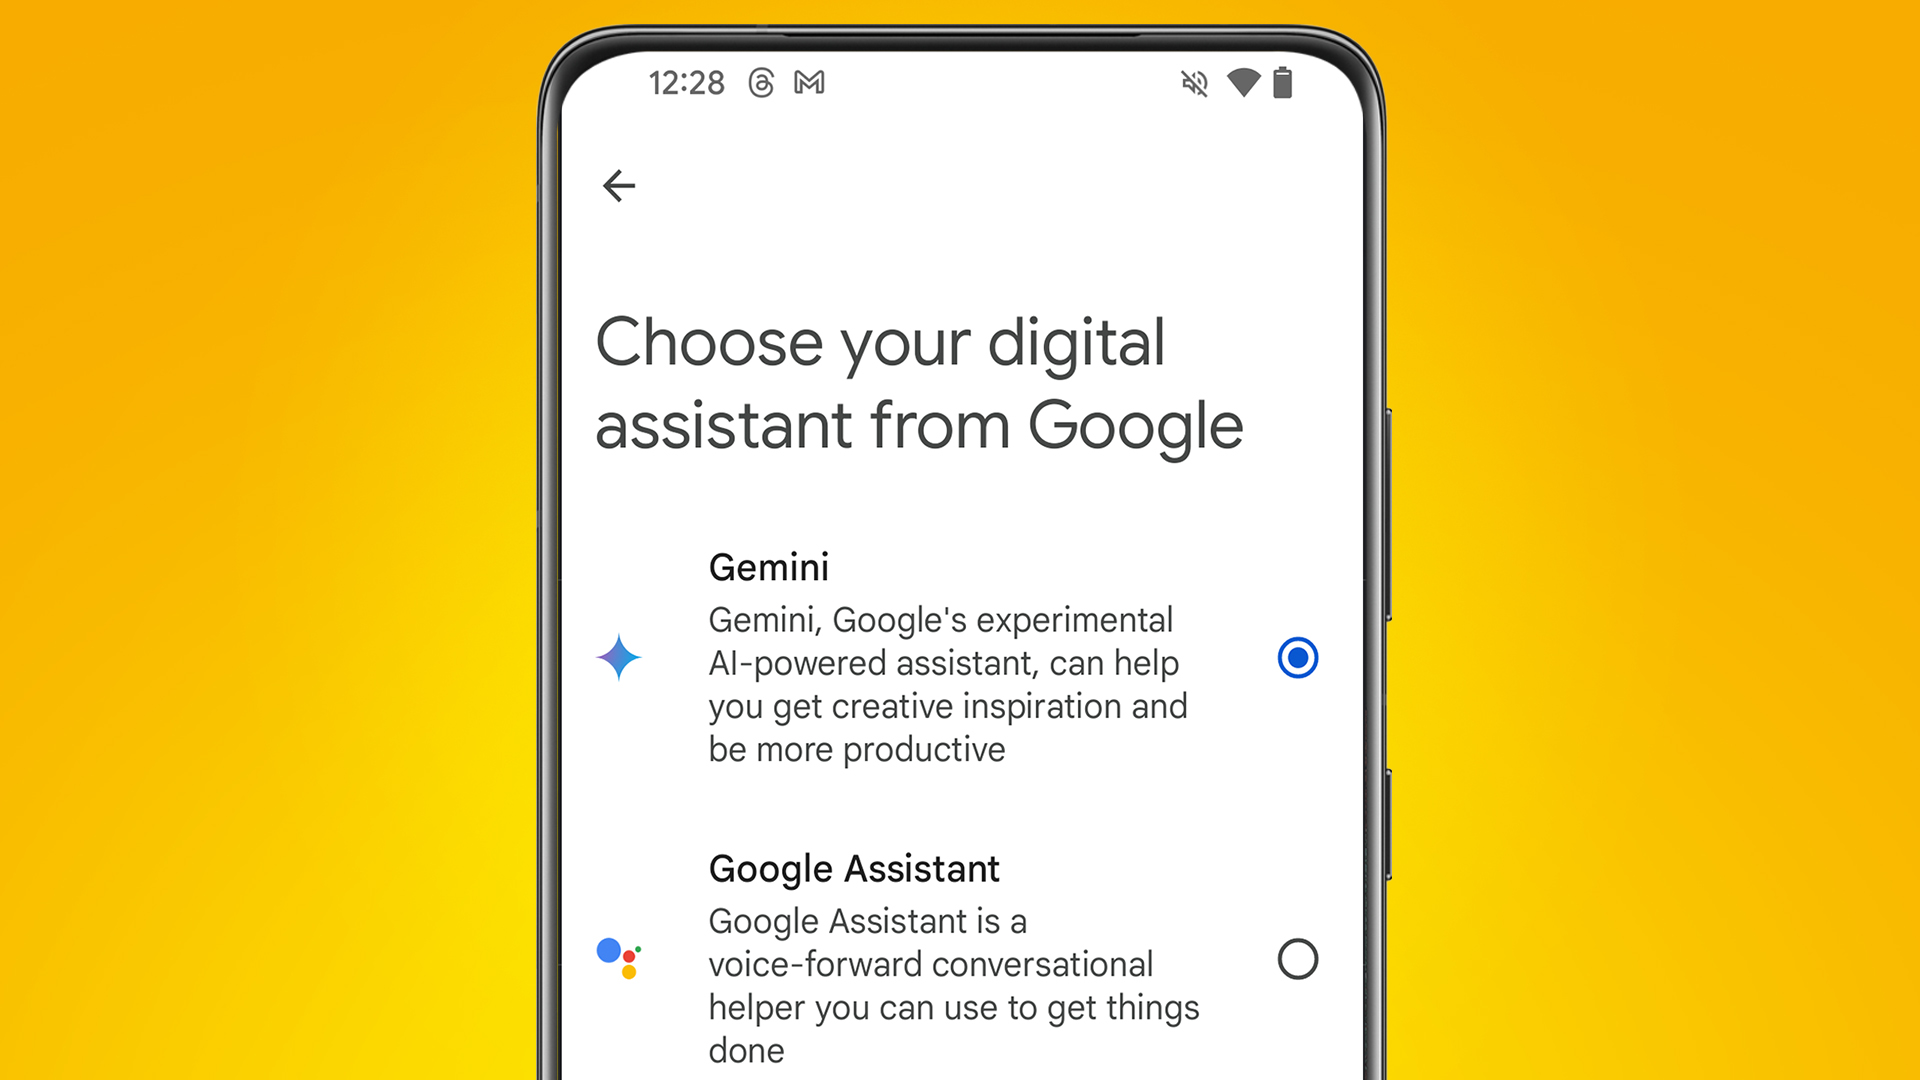 An Android phone on an orange background showing the Google Gemini app